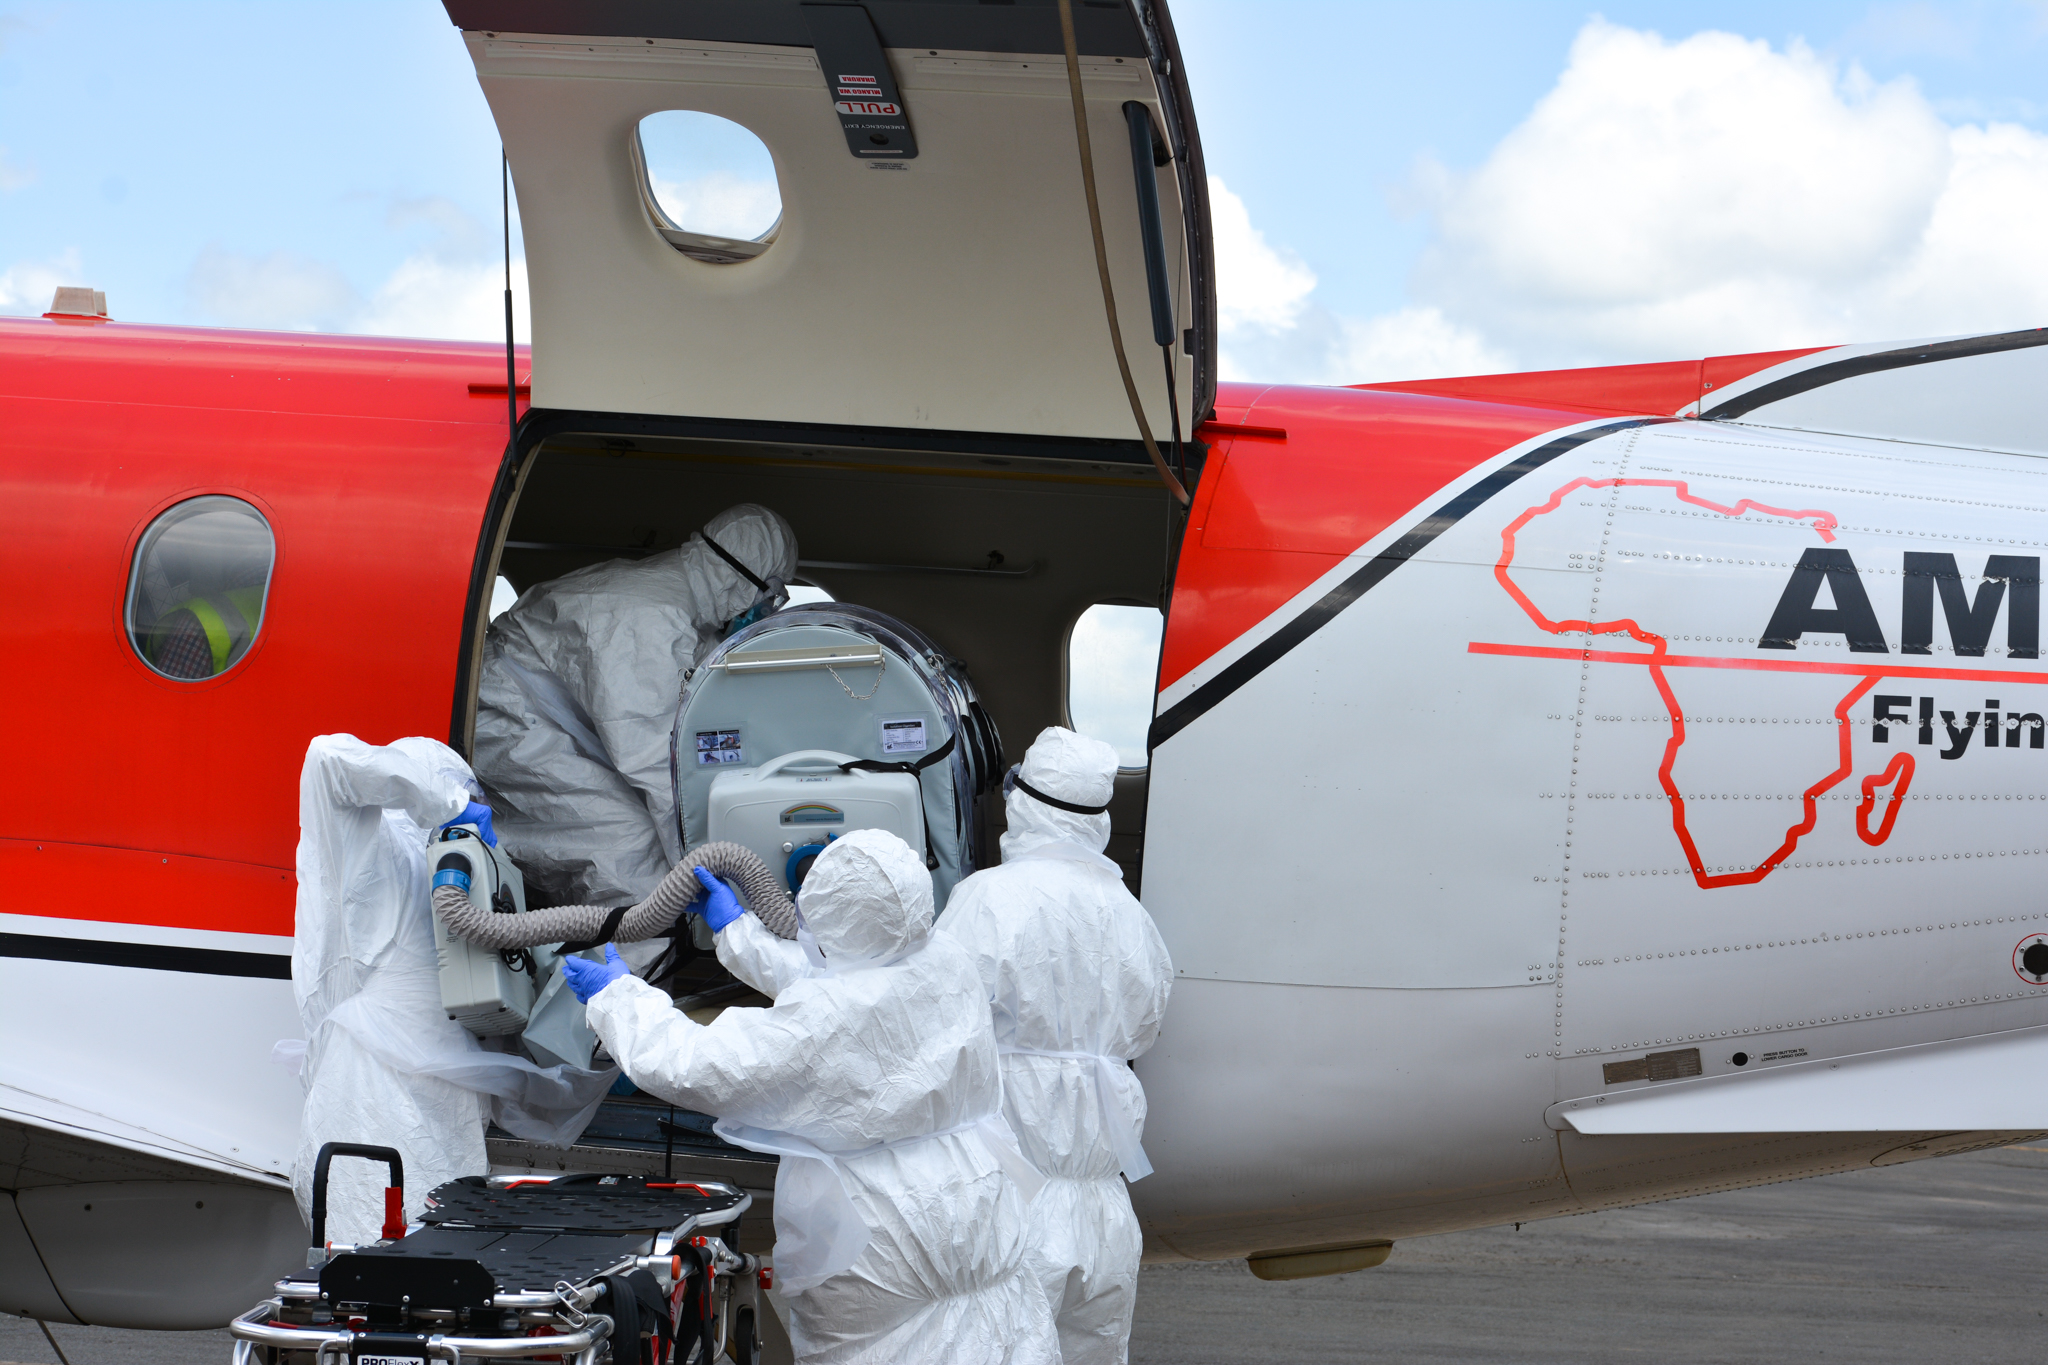 ISTAT Foundation Boosts AMREF Flying Doctors COVID-19 Response Capability